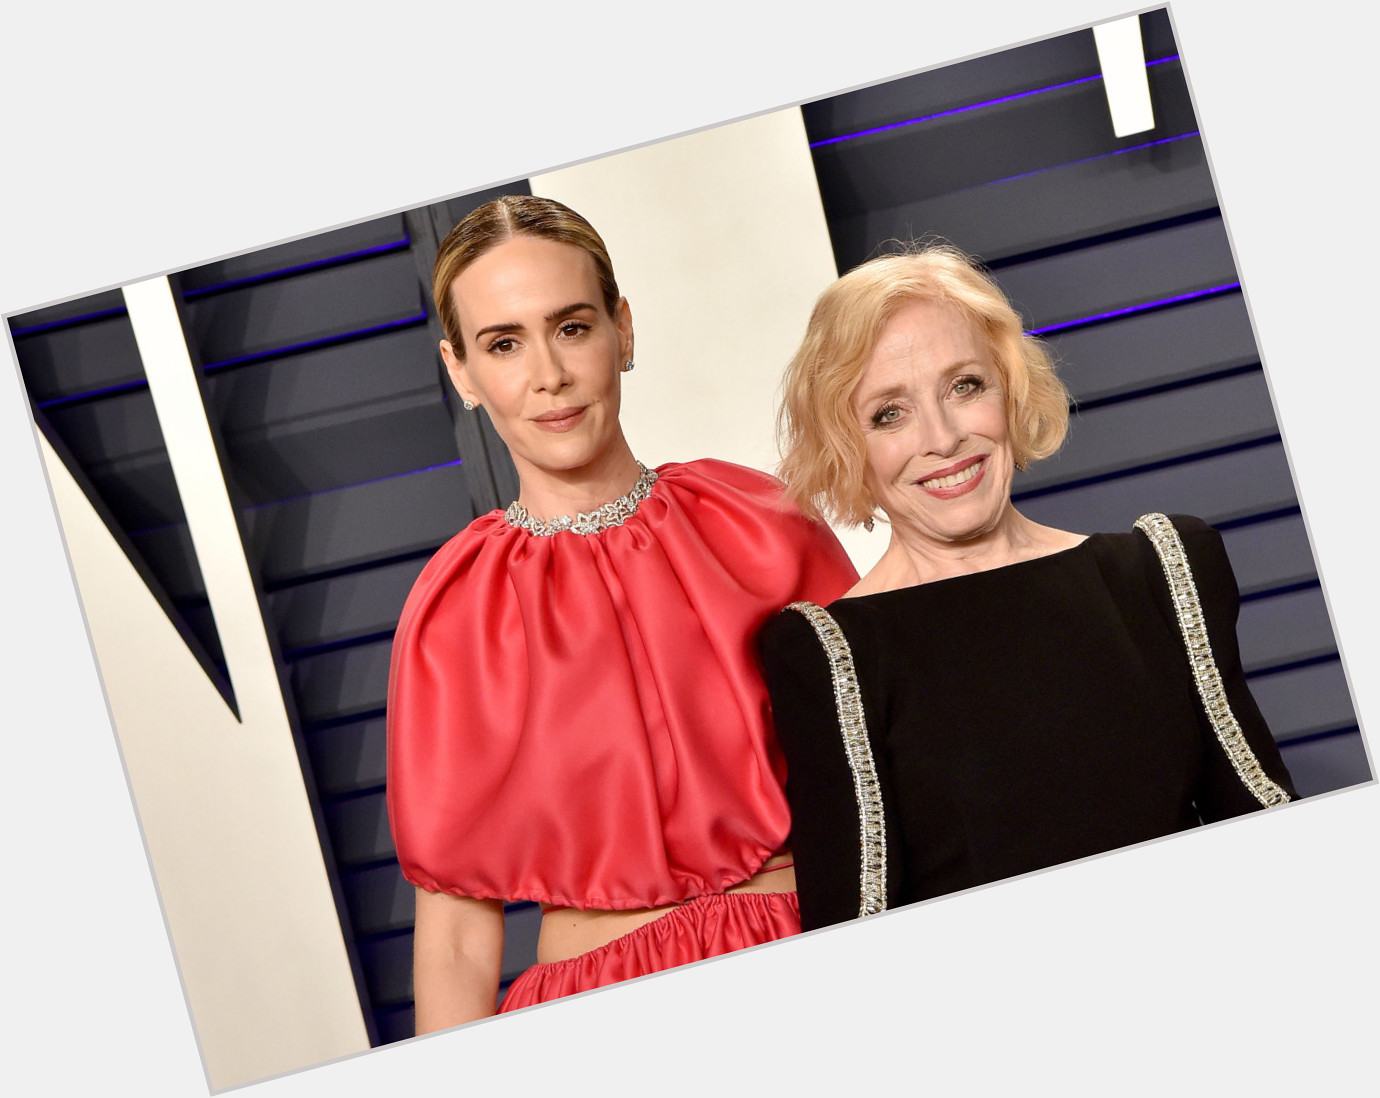   Sarah Paulson, 46, and Holland Taylor, 78, have been in a relationship since 2015. 